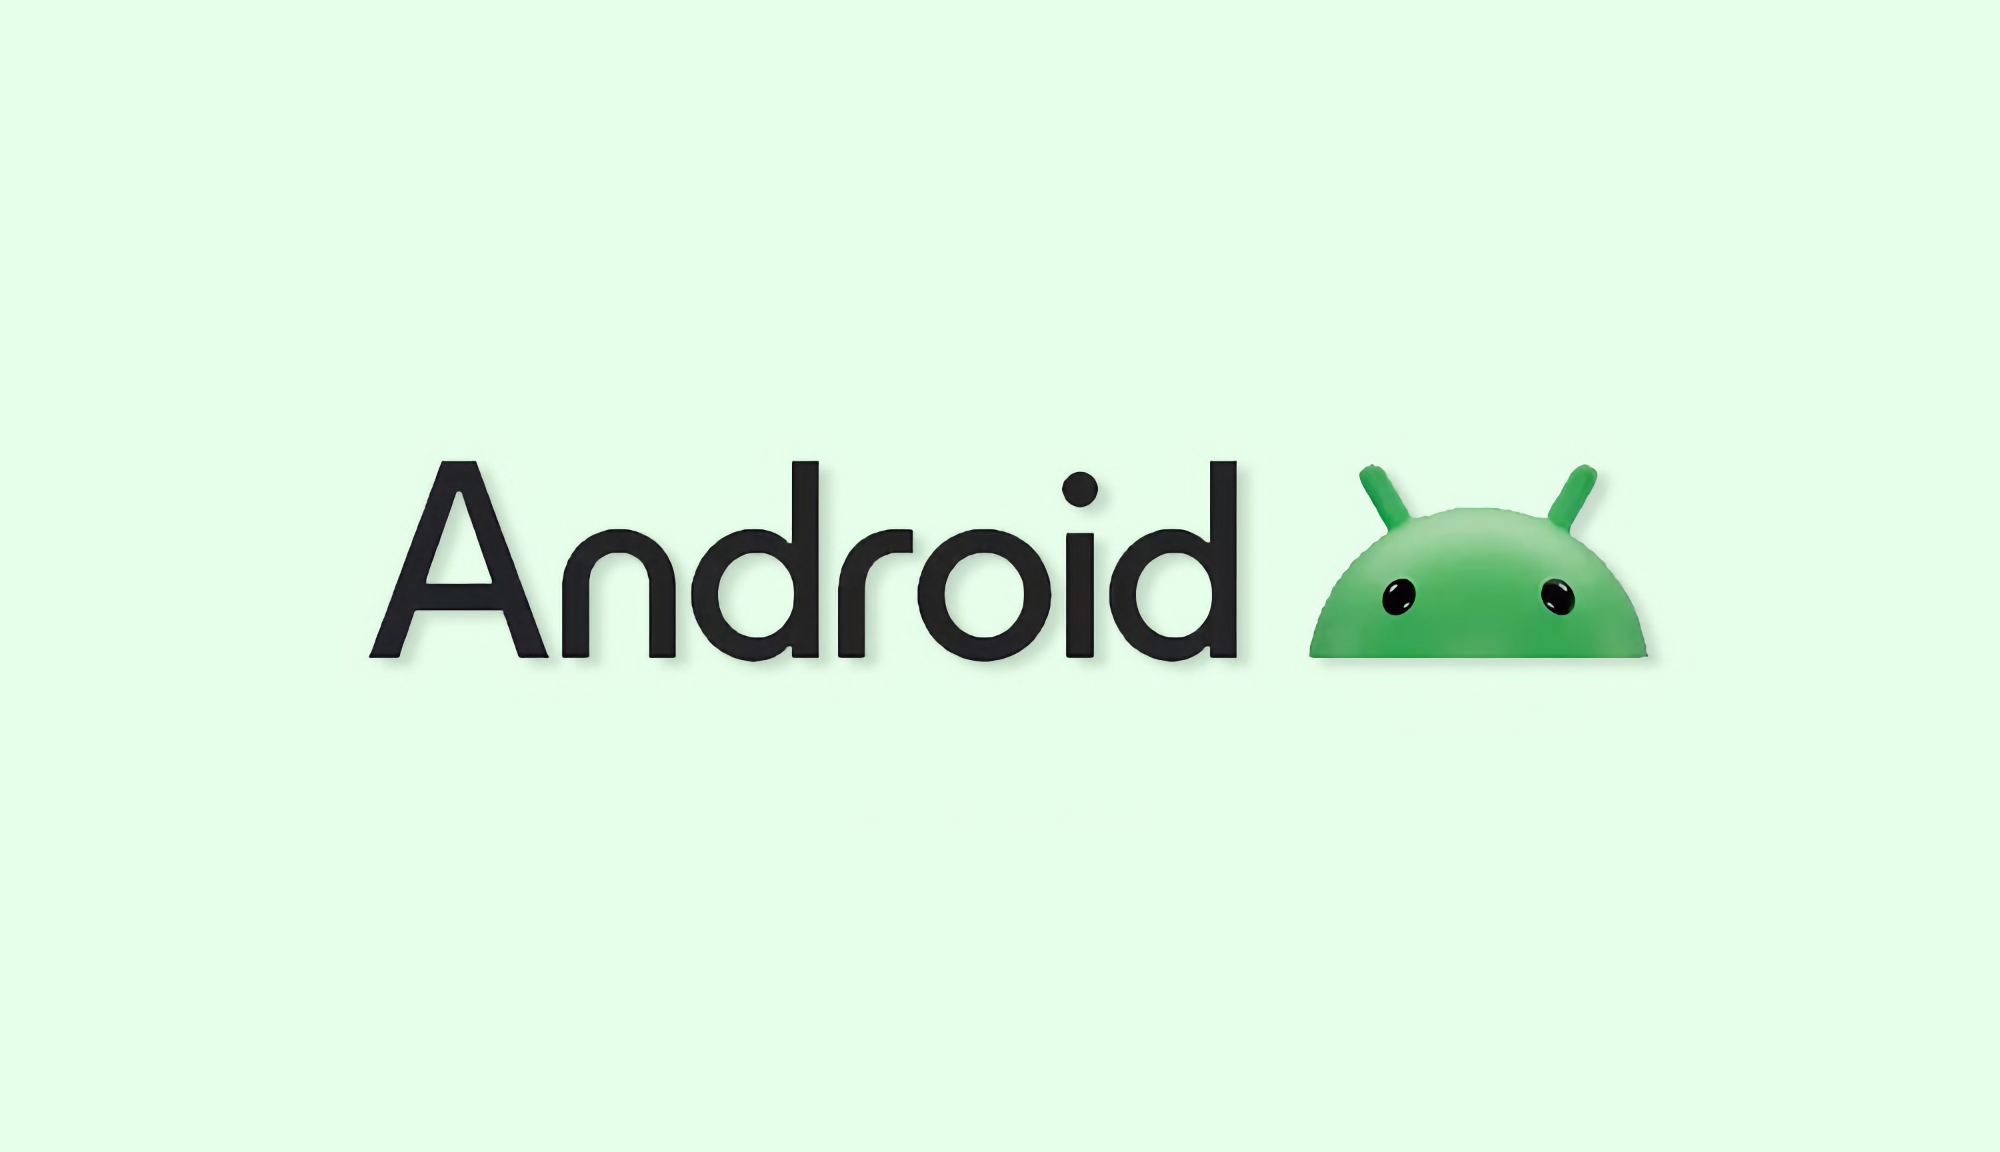 Google will release the first version of Android 15 Developer Preview on February 15